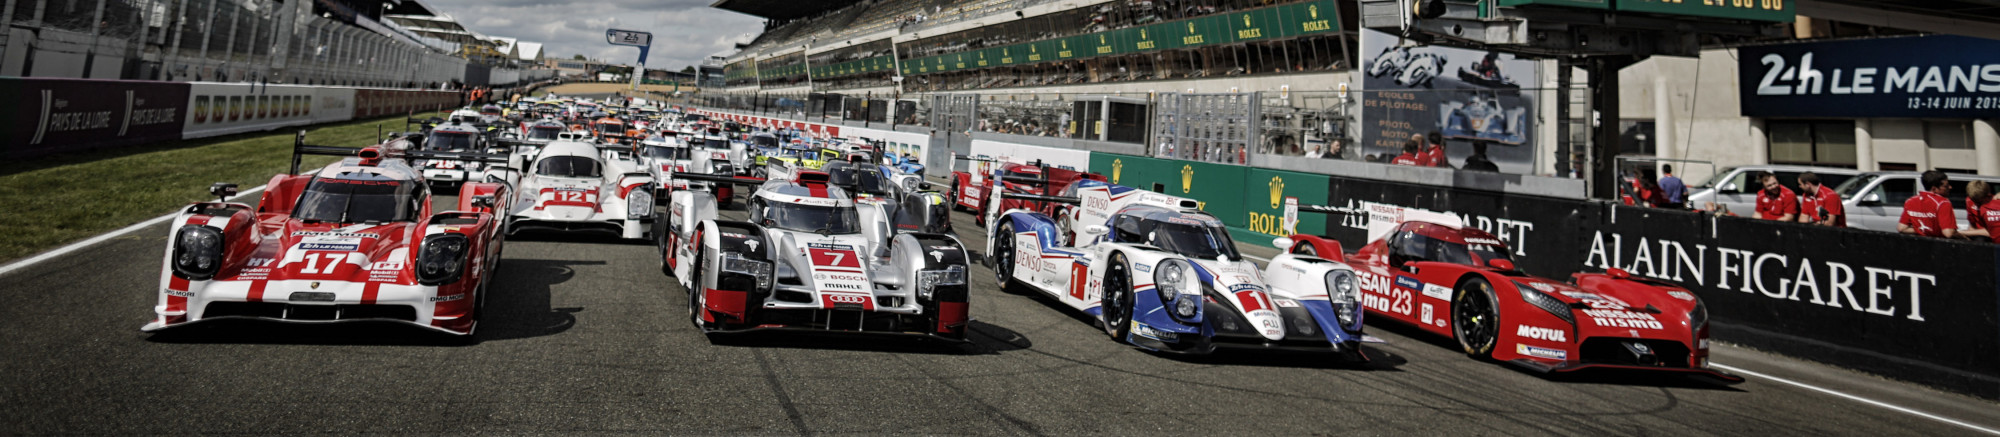 24 Heures of le Mans